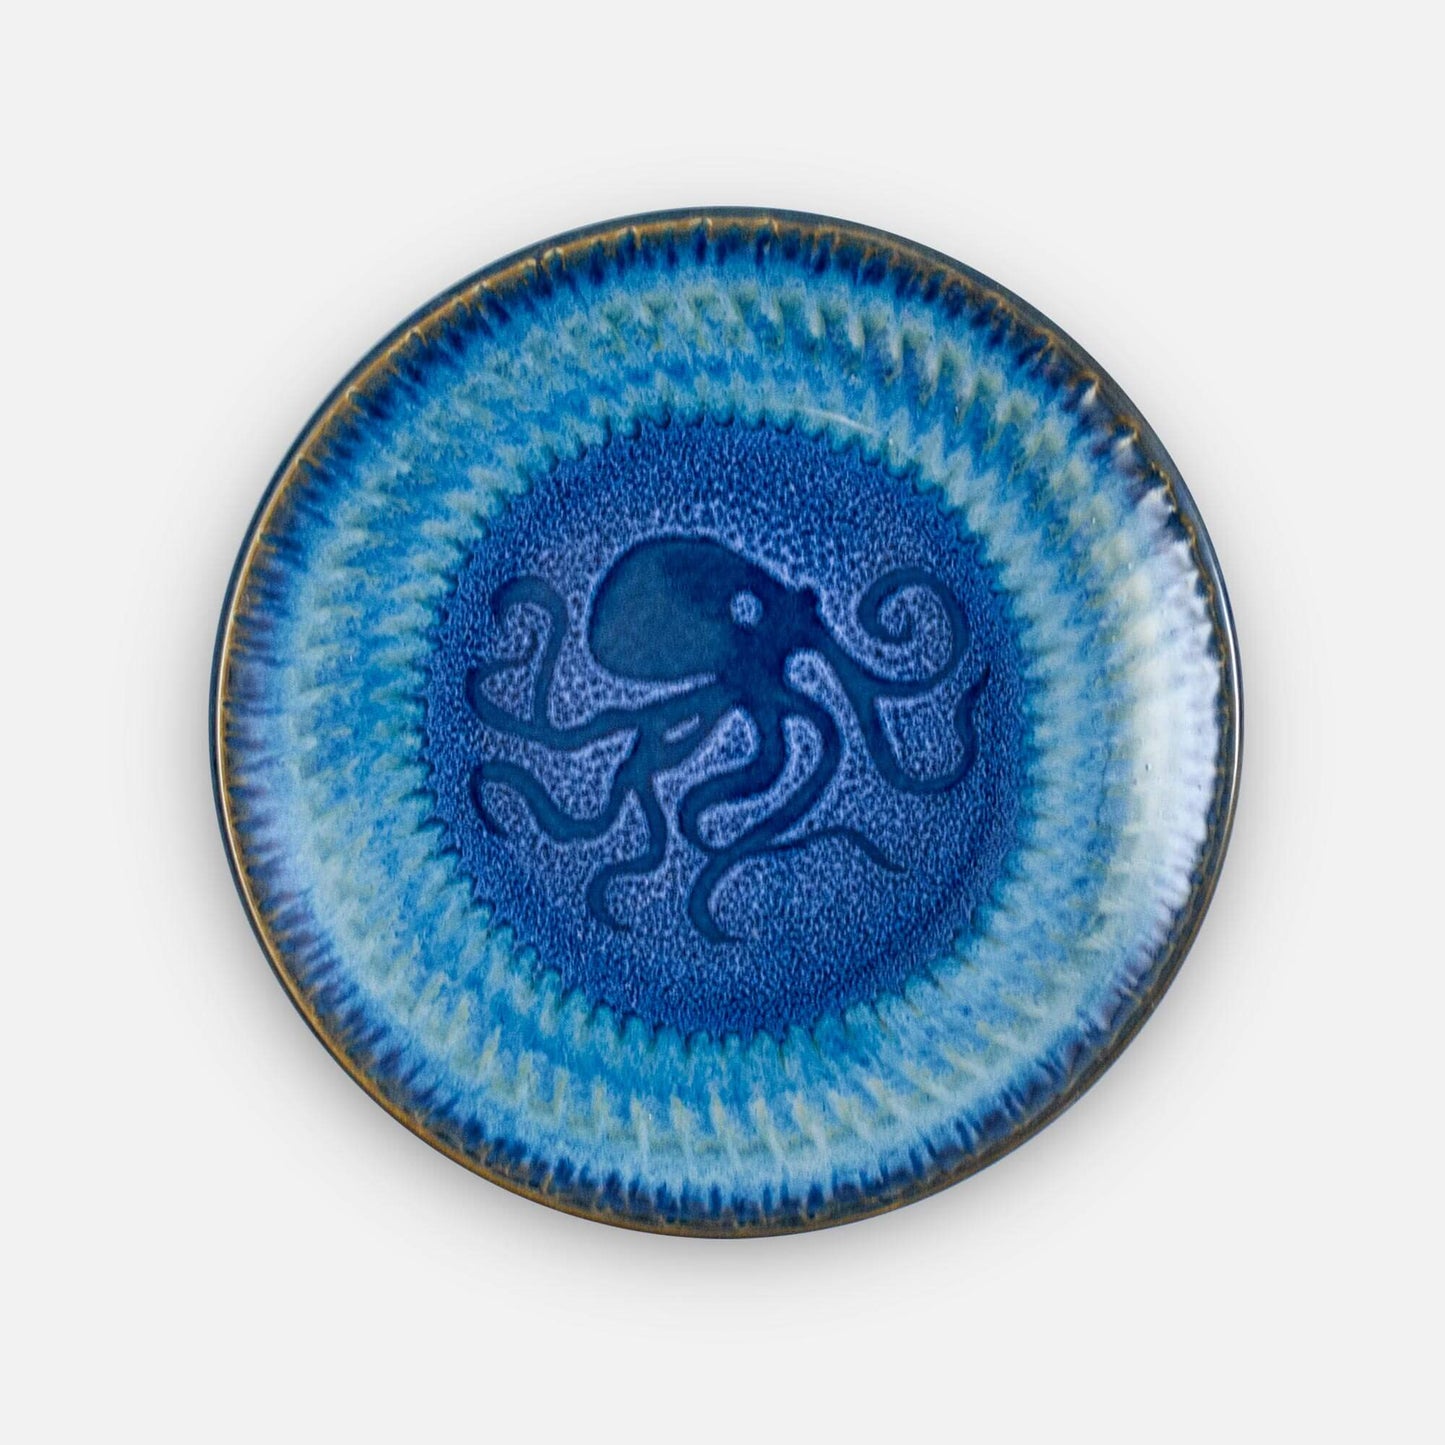 Handmade Pottery Rimless Dessert Plate made by Georgetown Pottery in Maine in Blue Octopus pattern